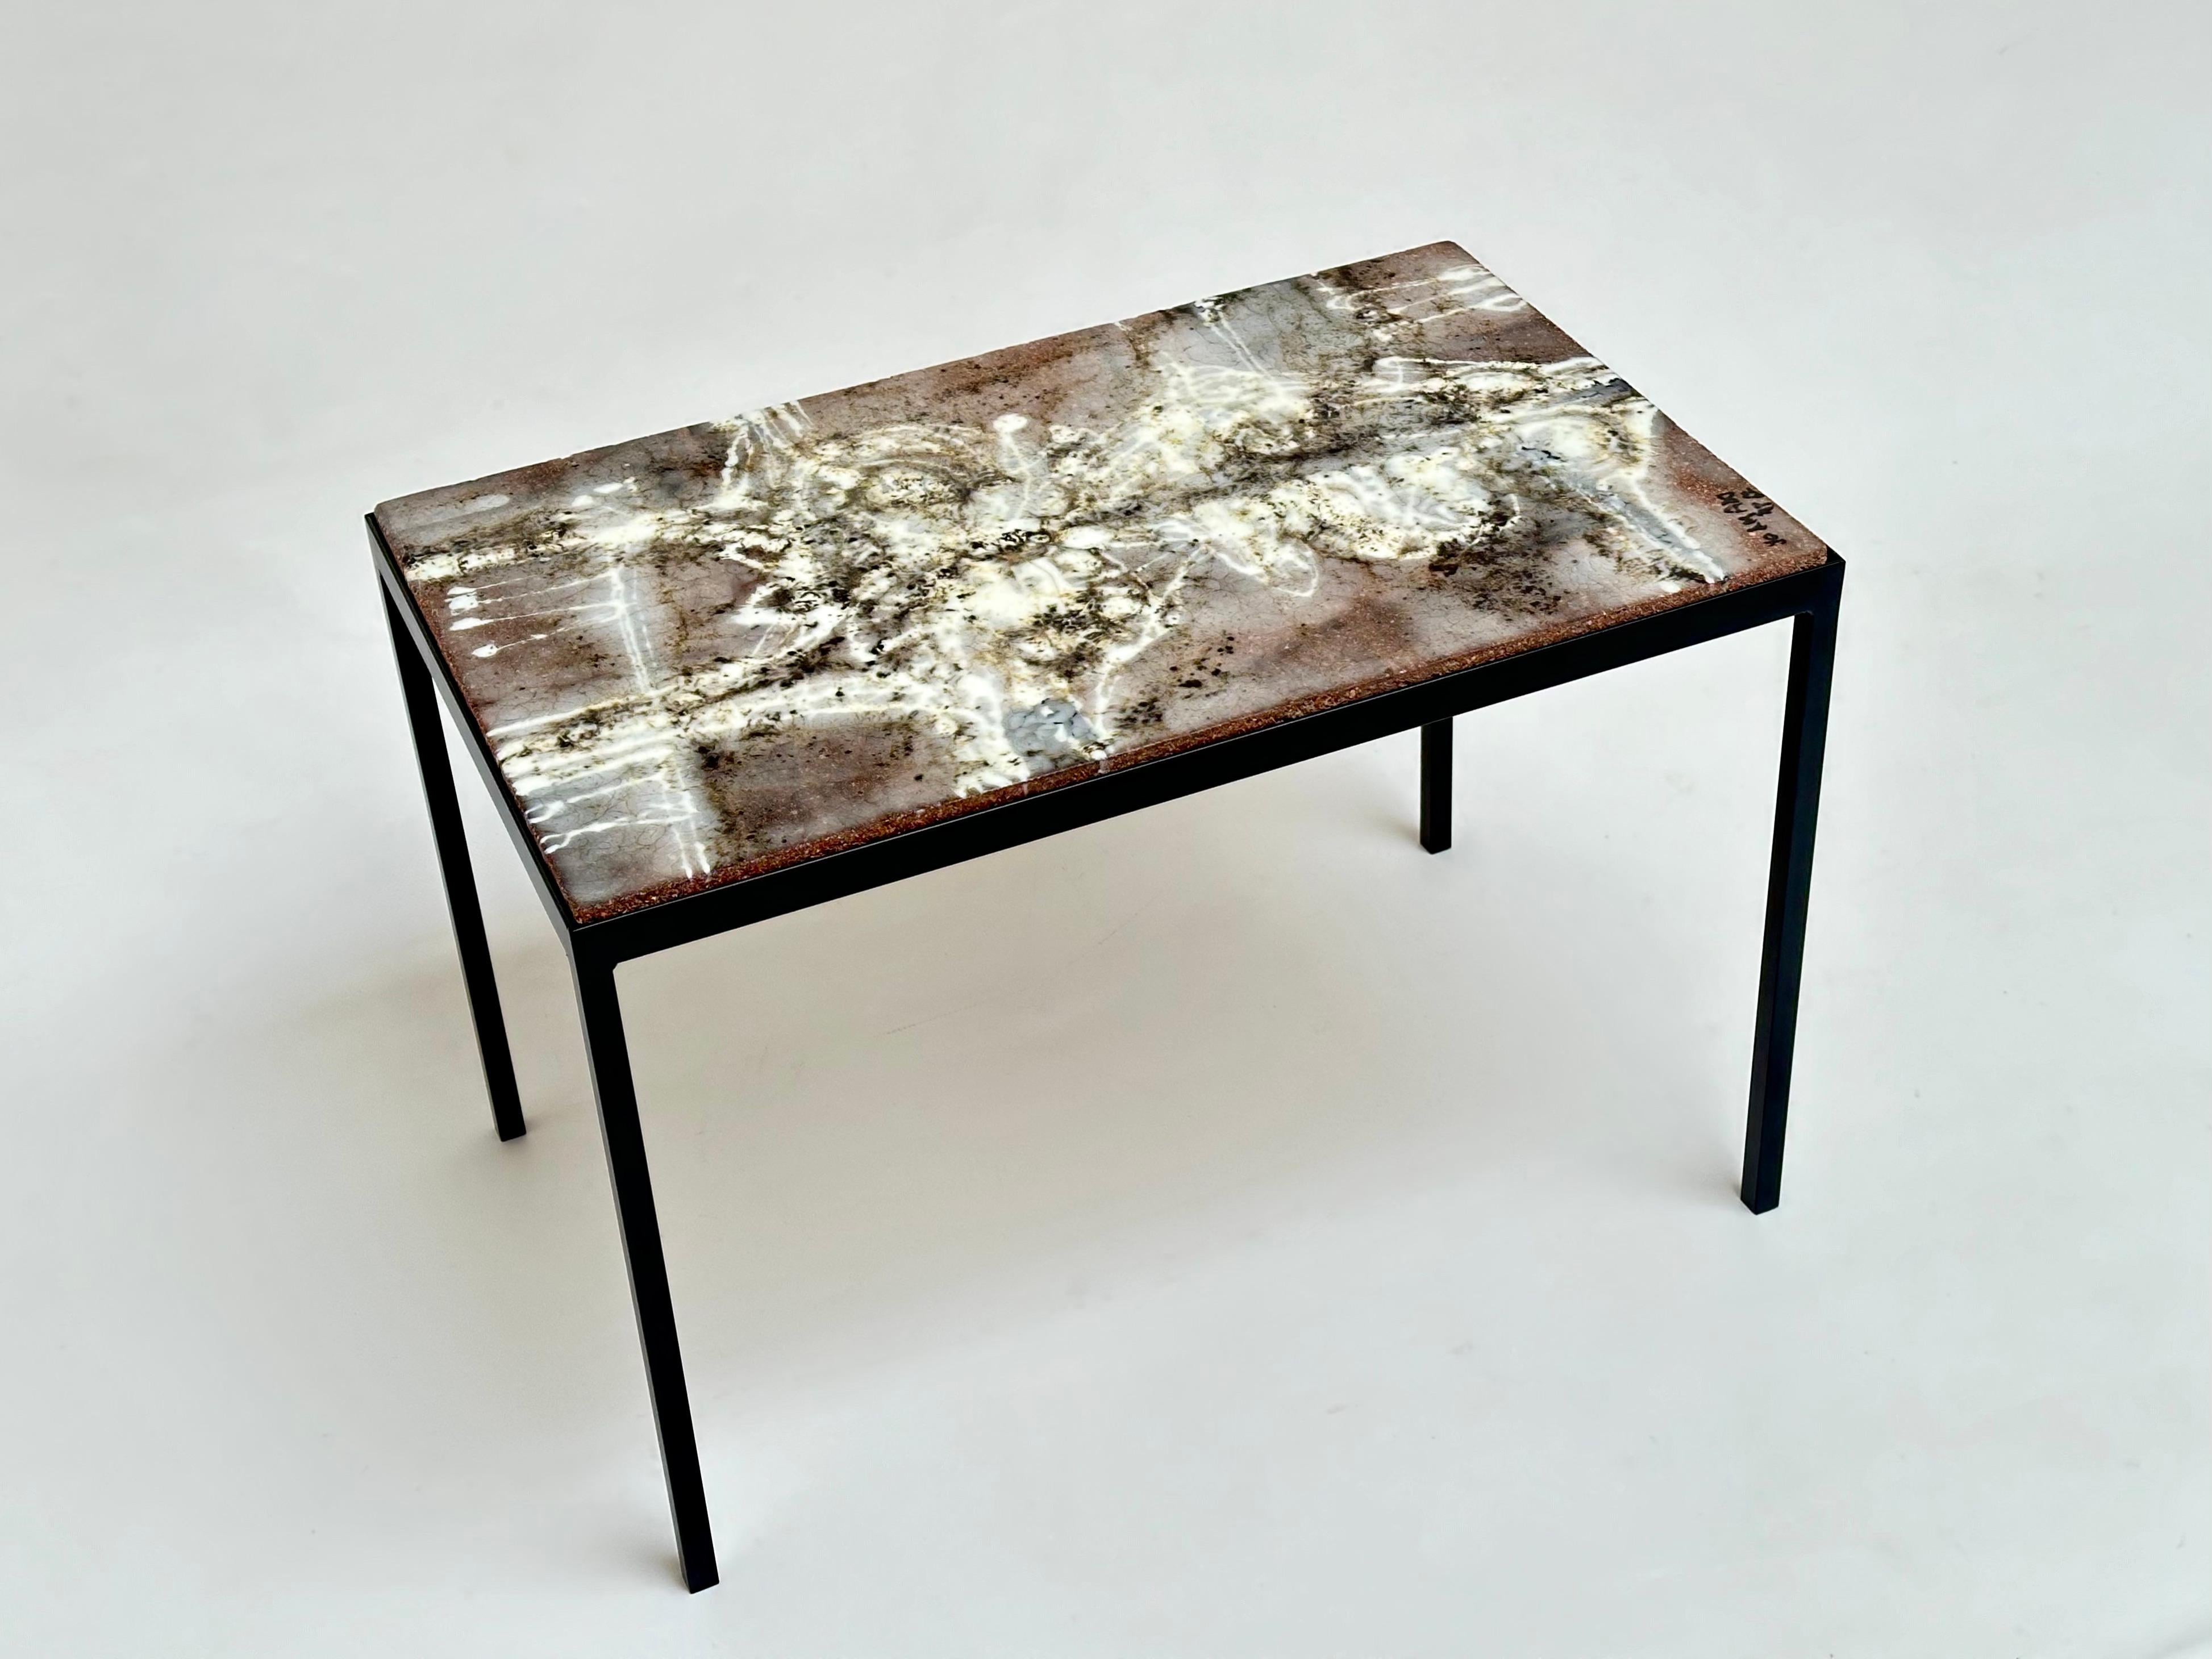 Decorative Low Table, Jo Amado, France 1962 For Sale 1